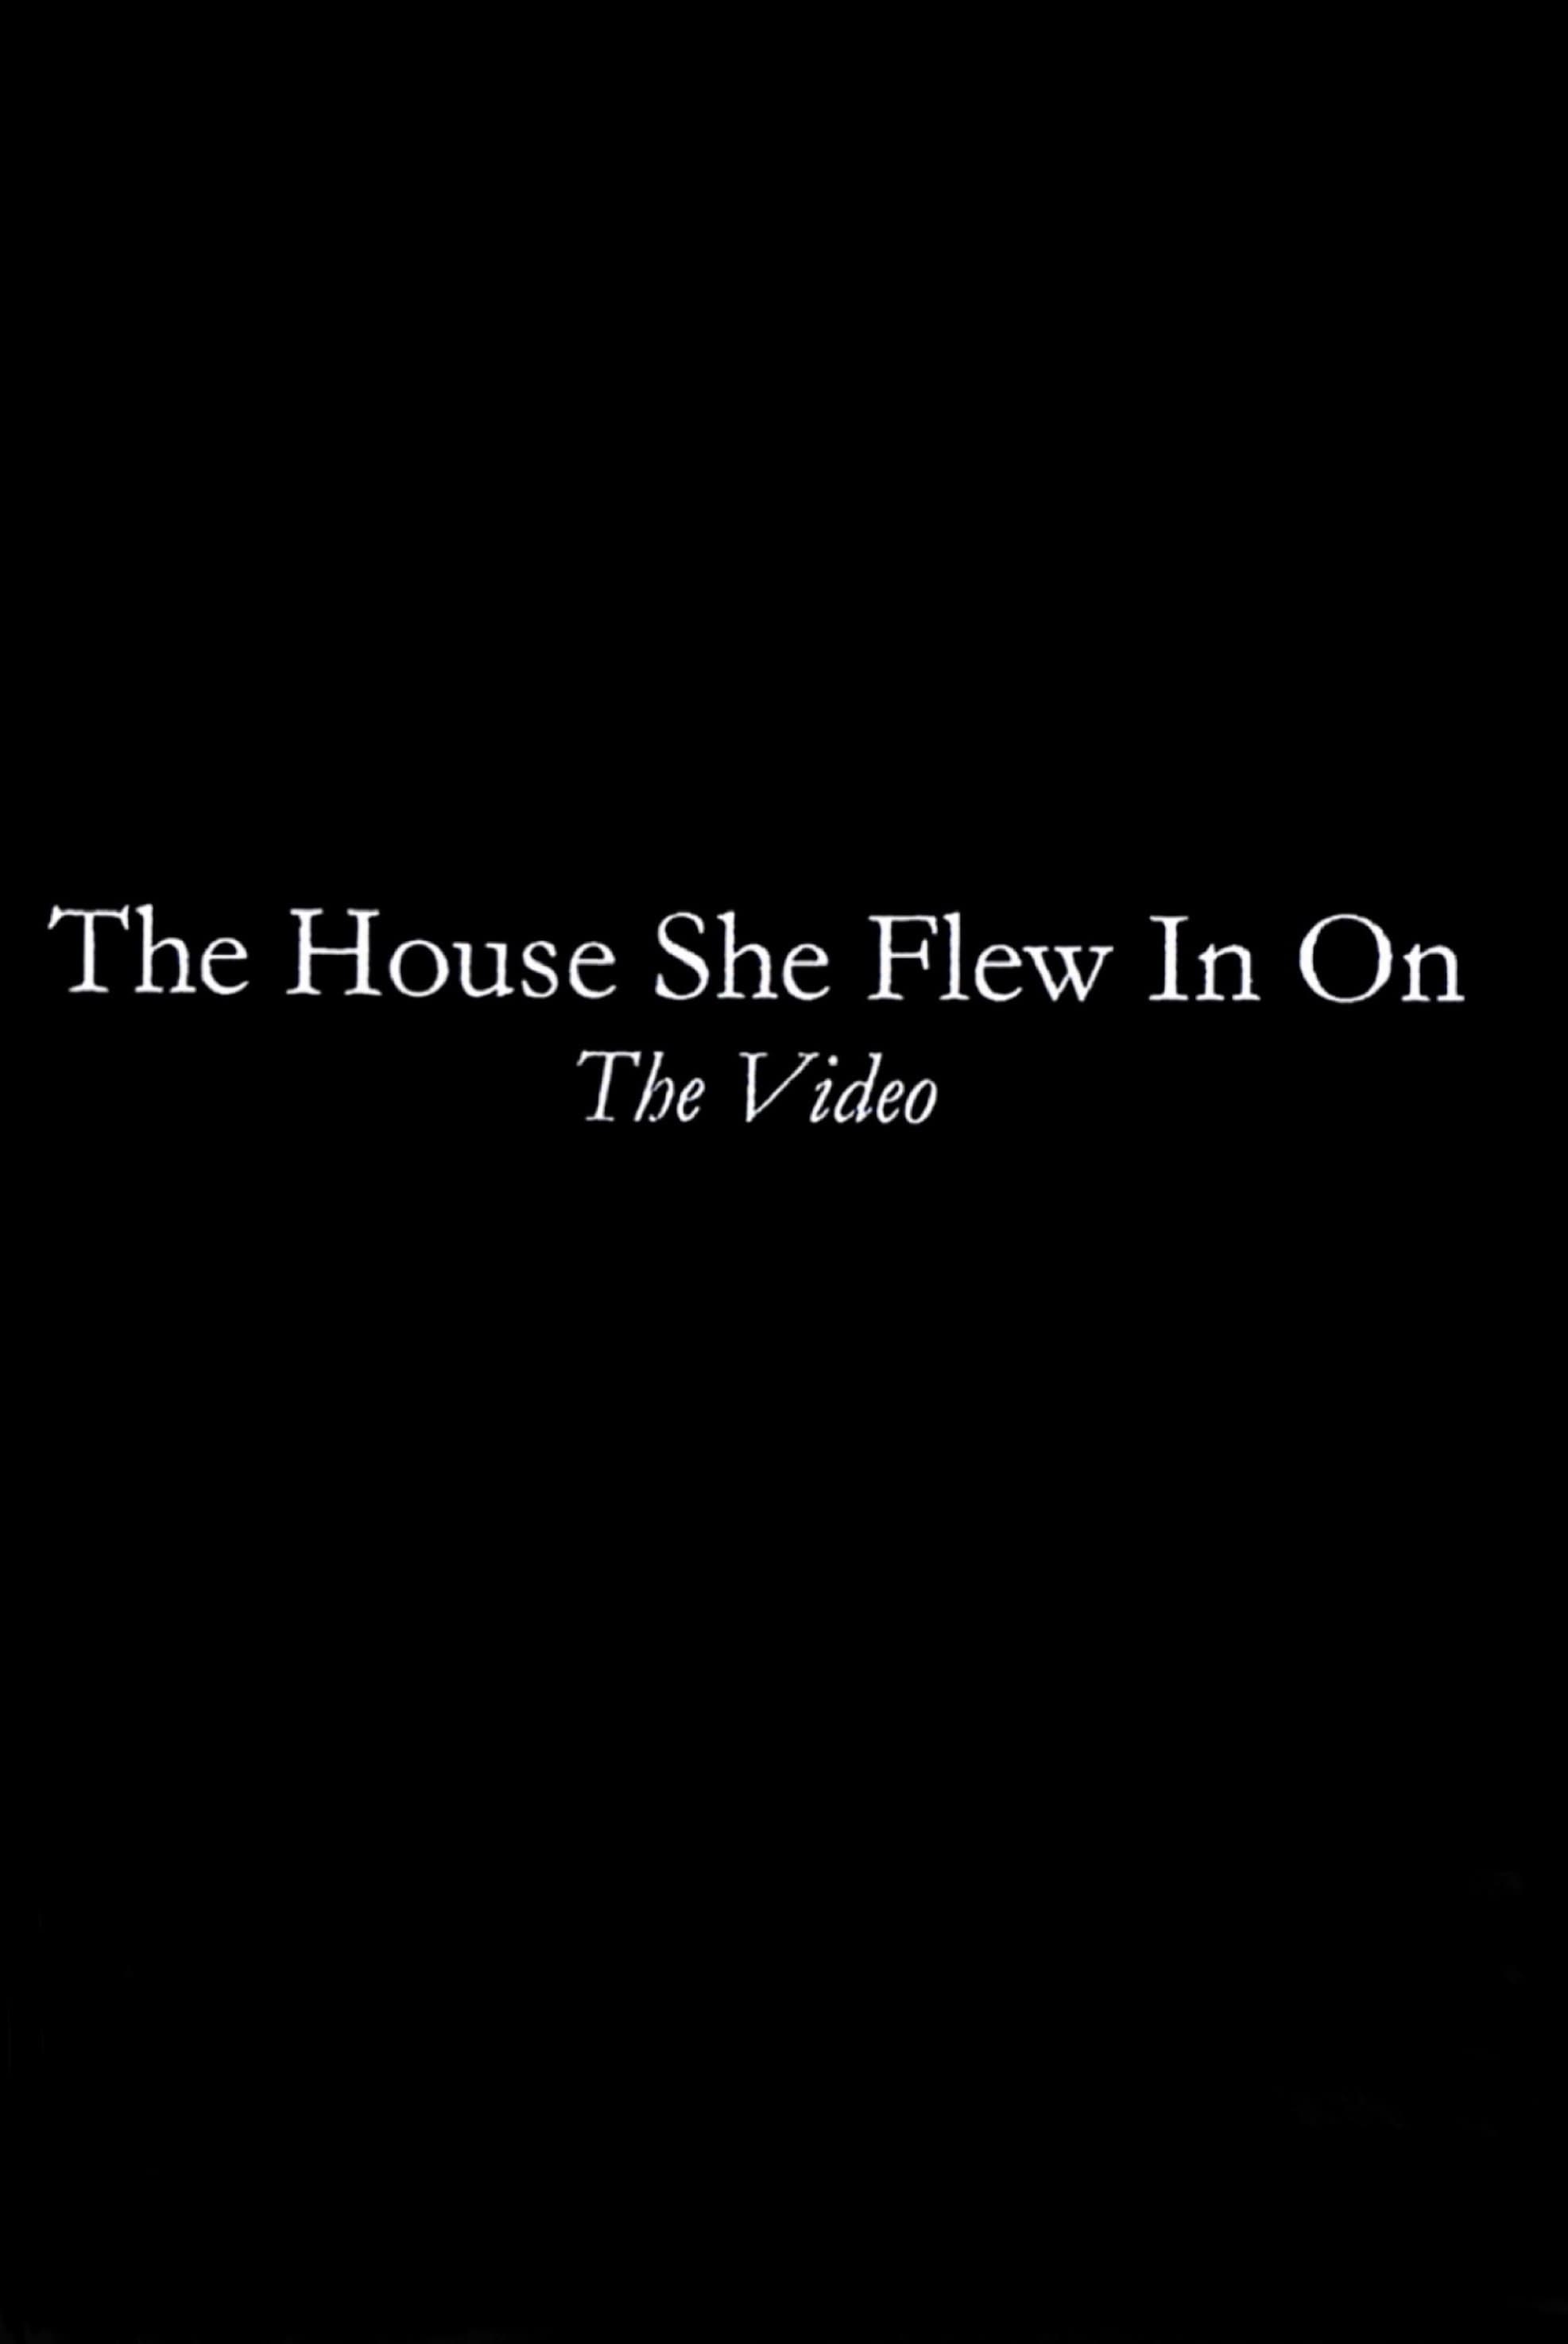 The House She Flew In On: The Video